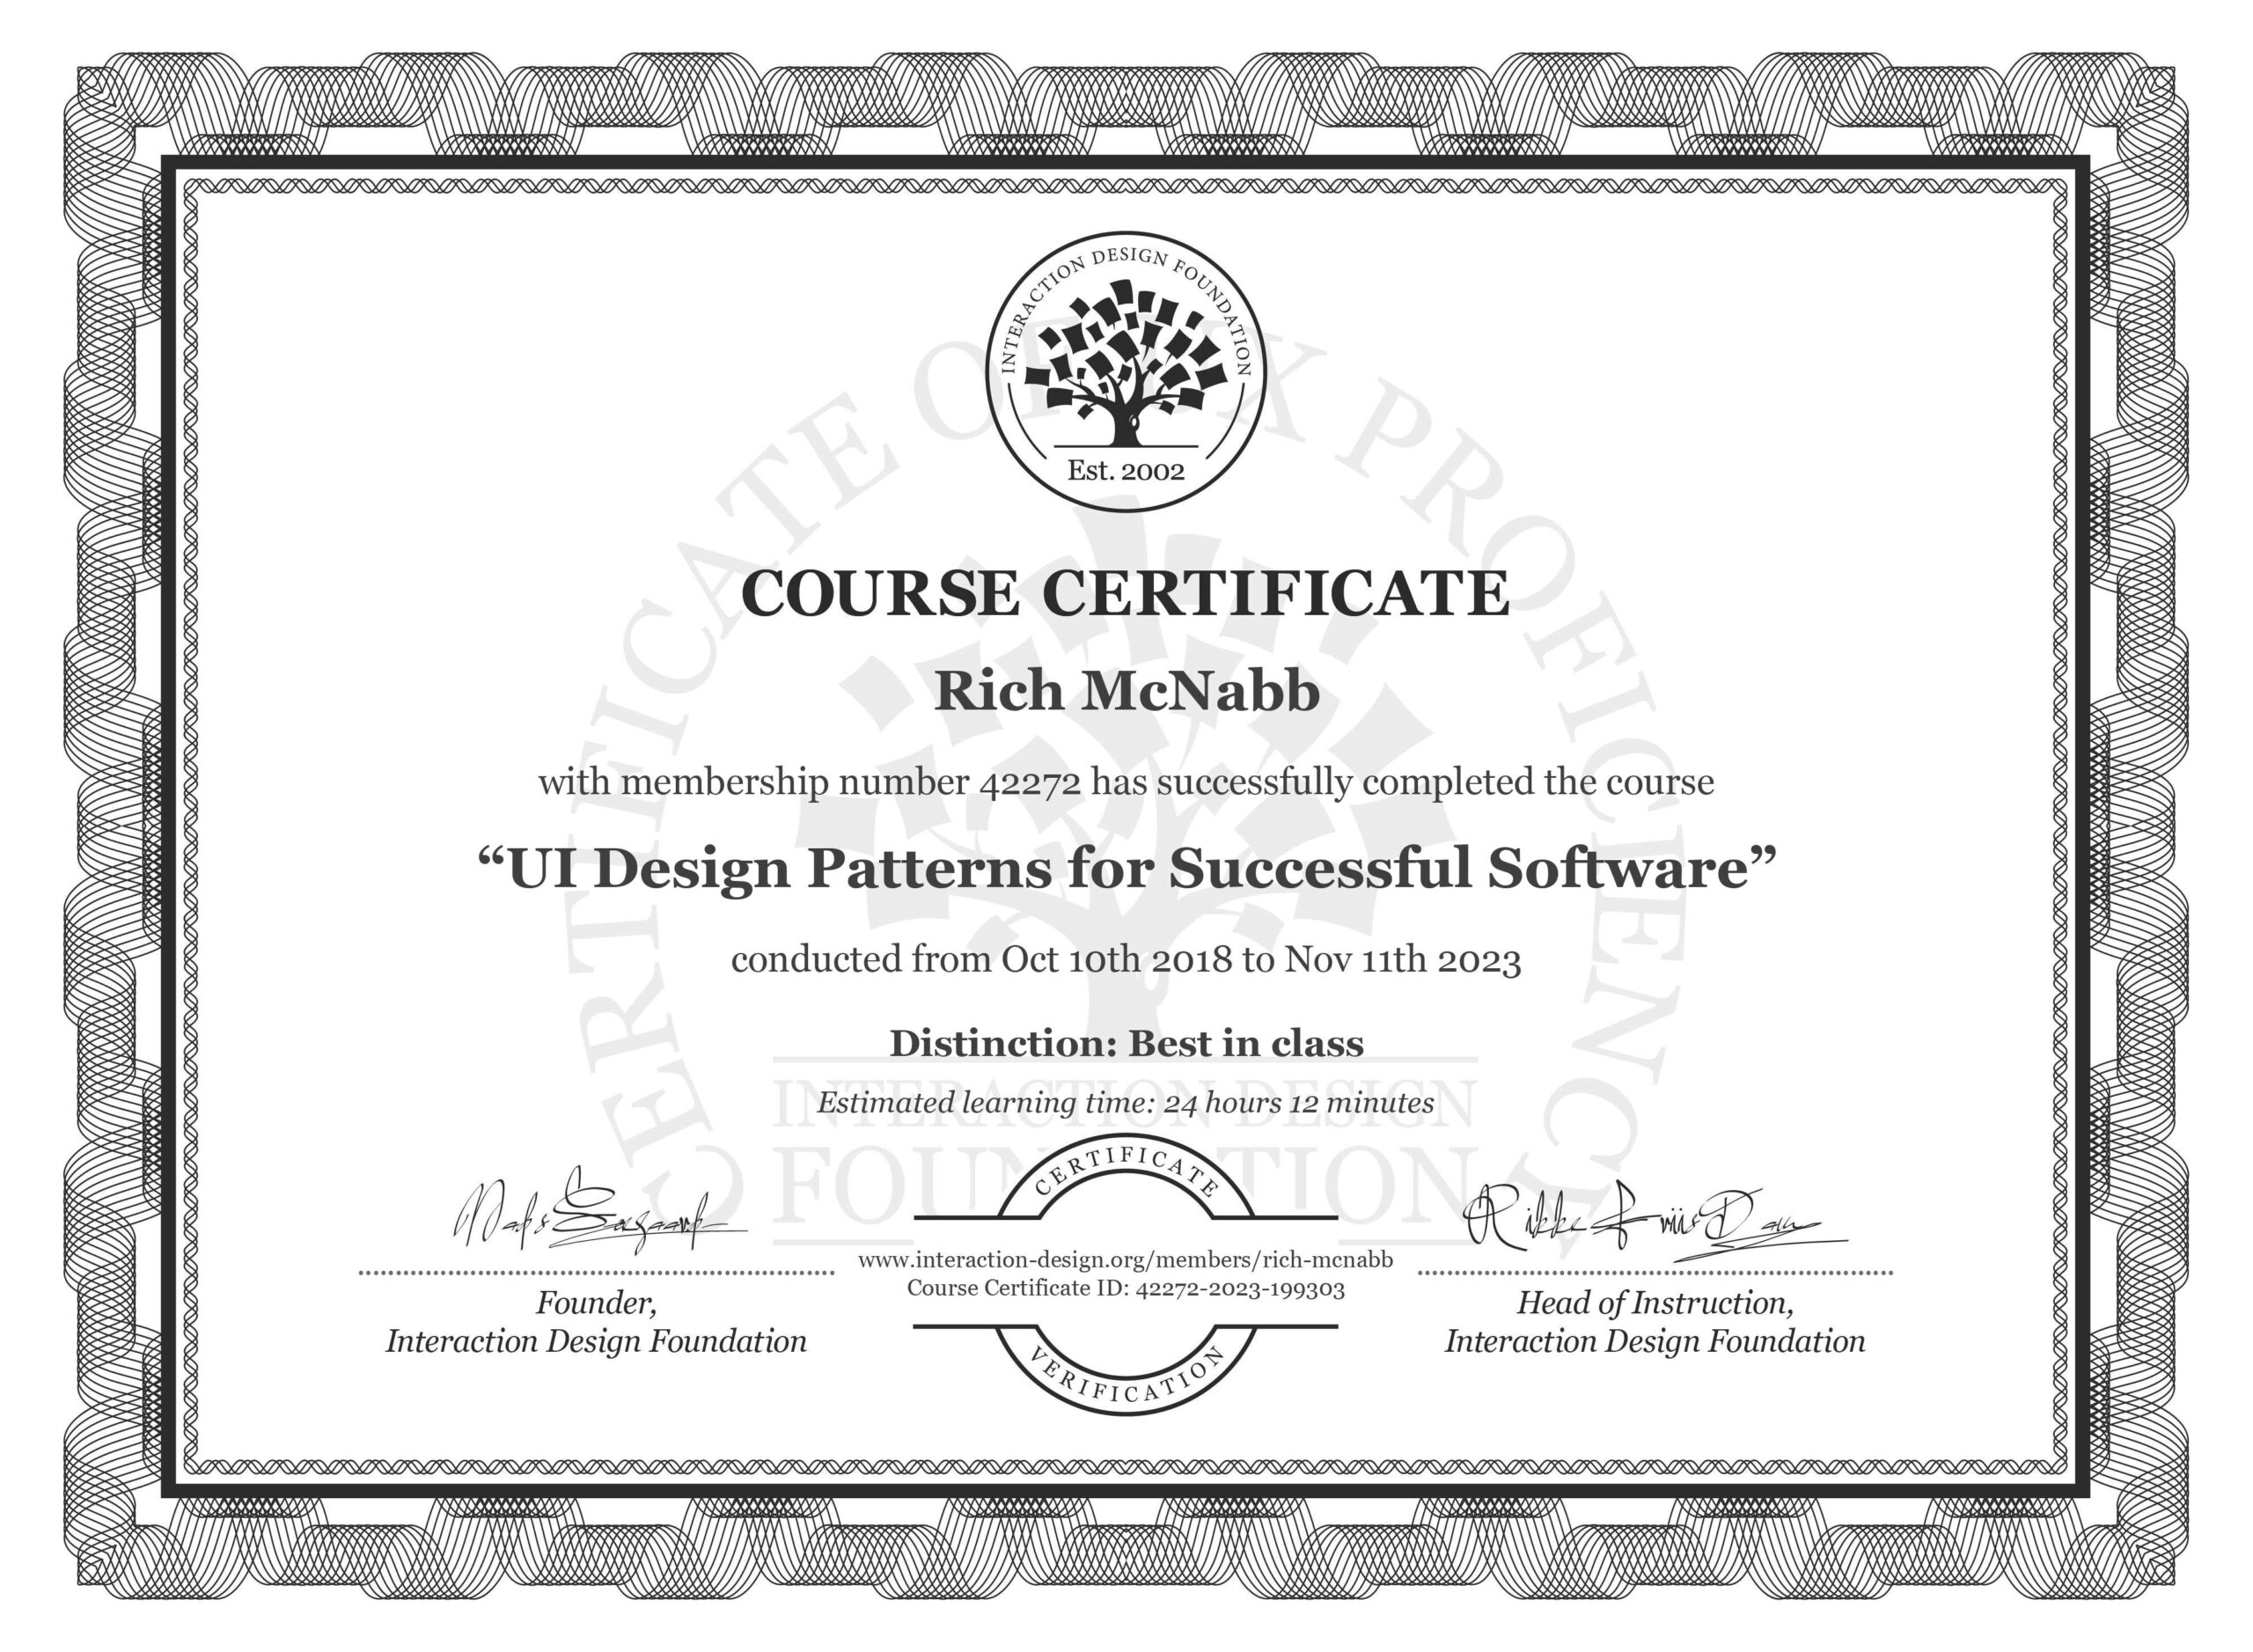 Rich McNabb’s Course Certificate: UI Design Patterns for Successful Software